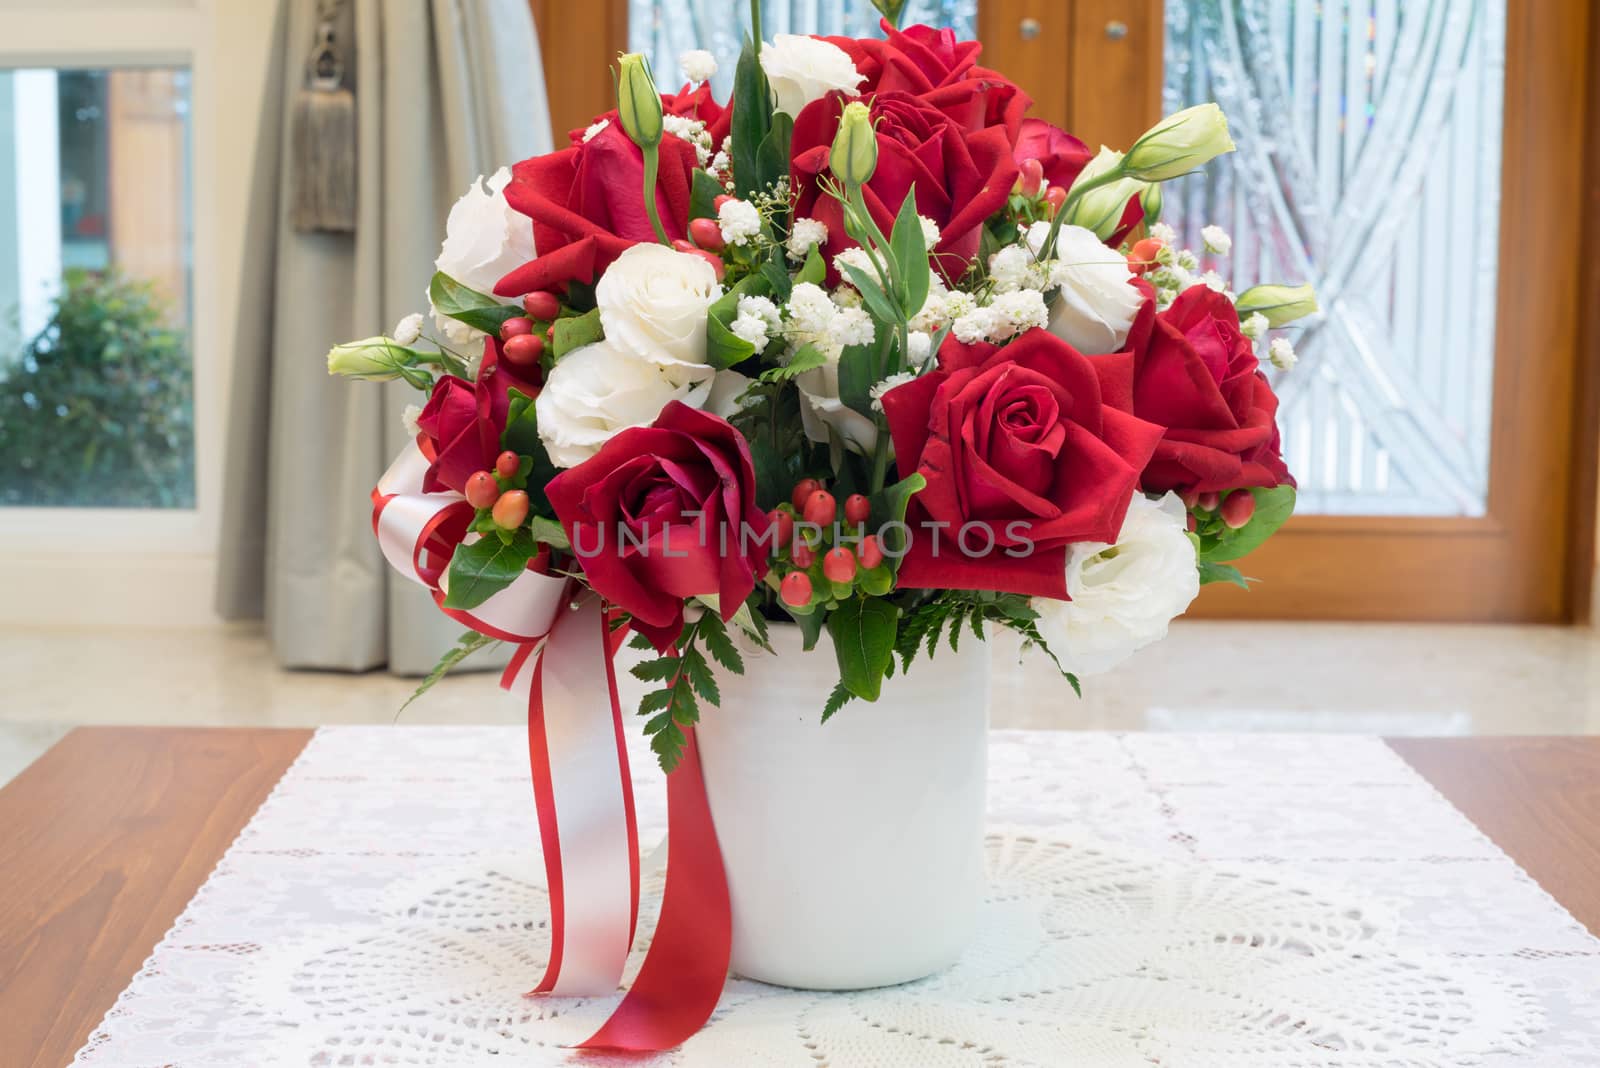 Roses flowers bouquet inside vase on desk in house decoration by iamway